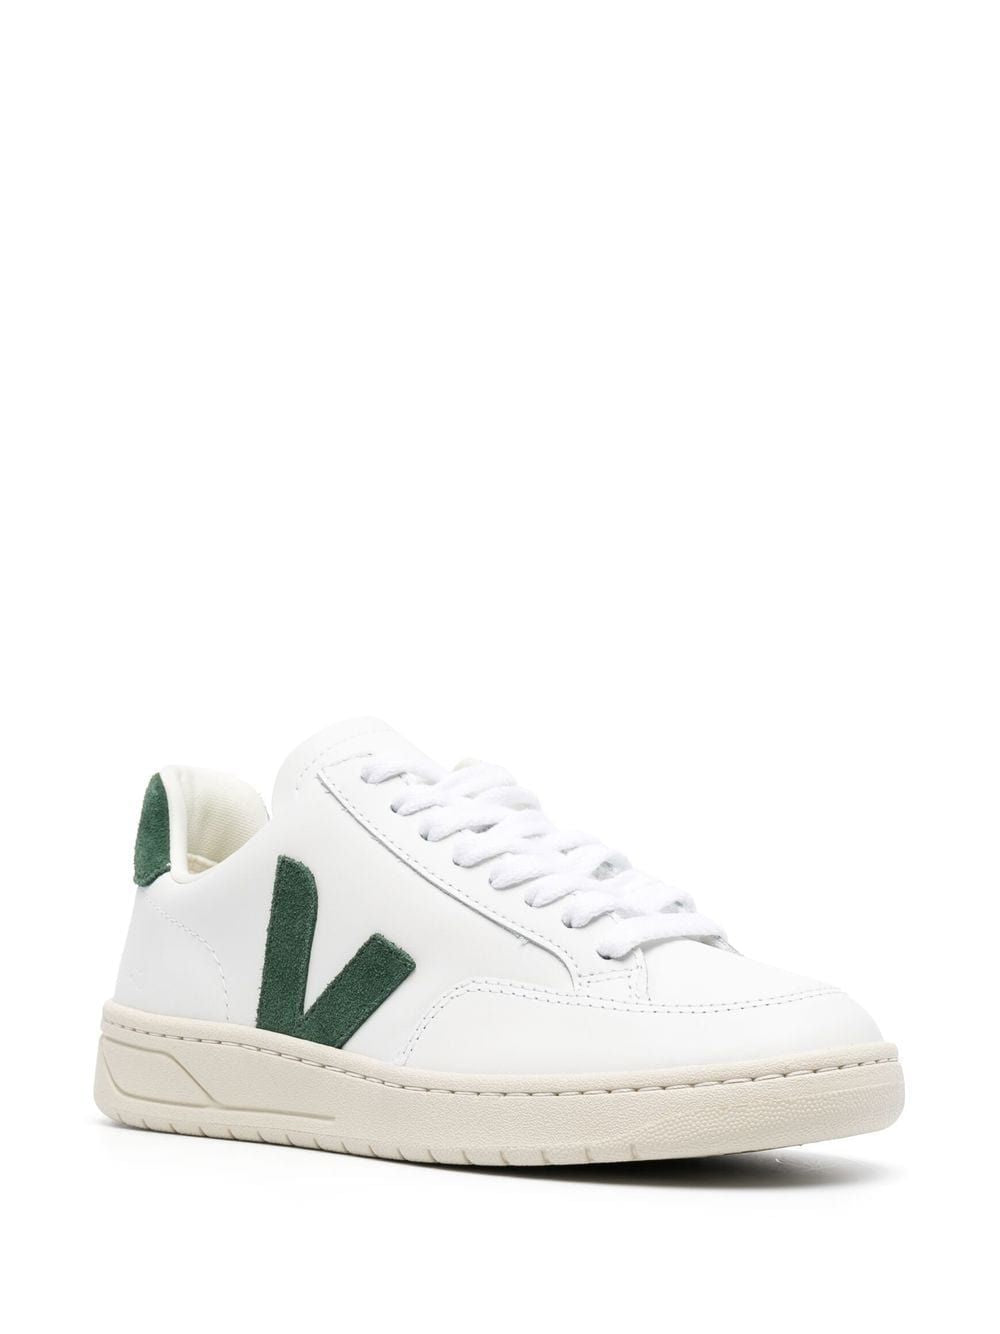 Veja V-12 Leather White Cyprus Sneakers - Front Side